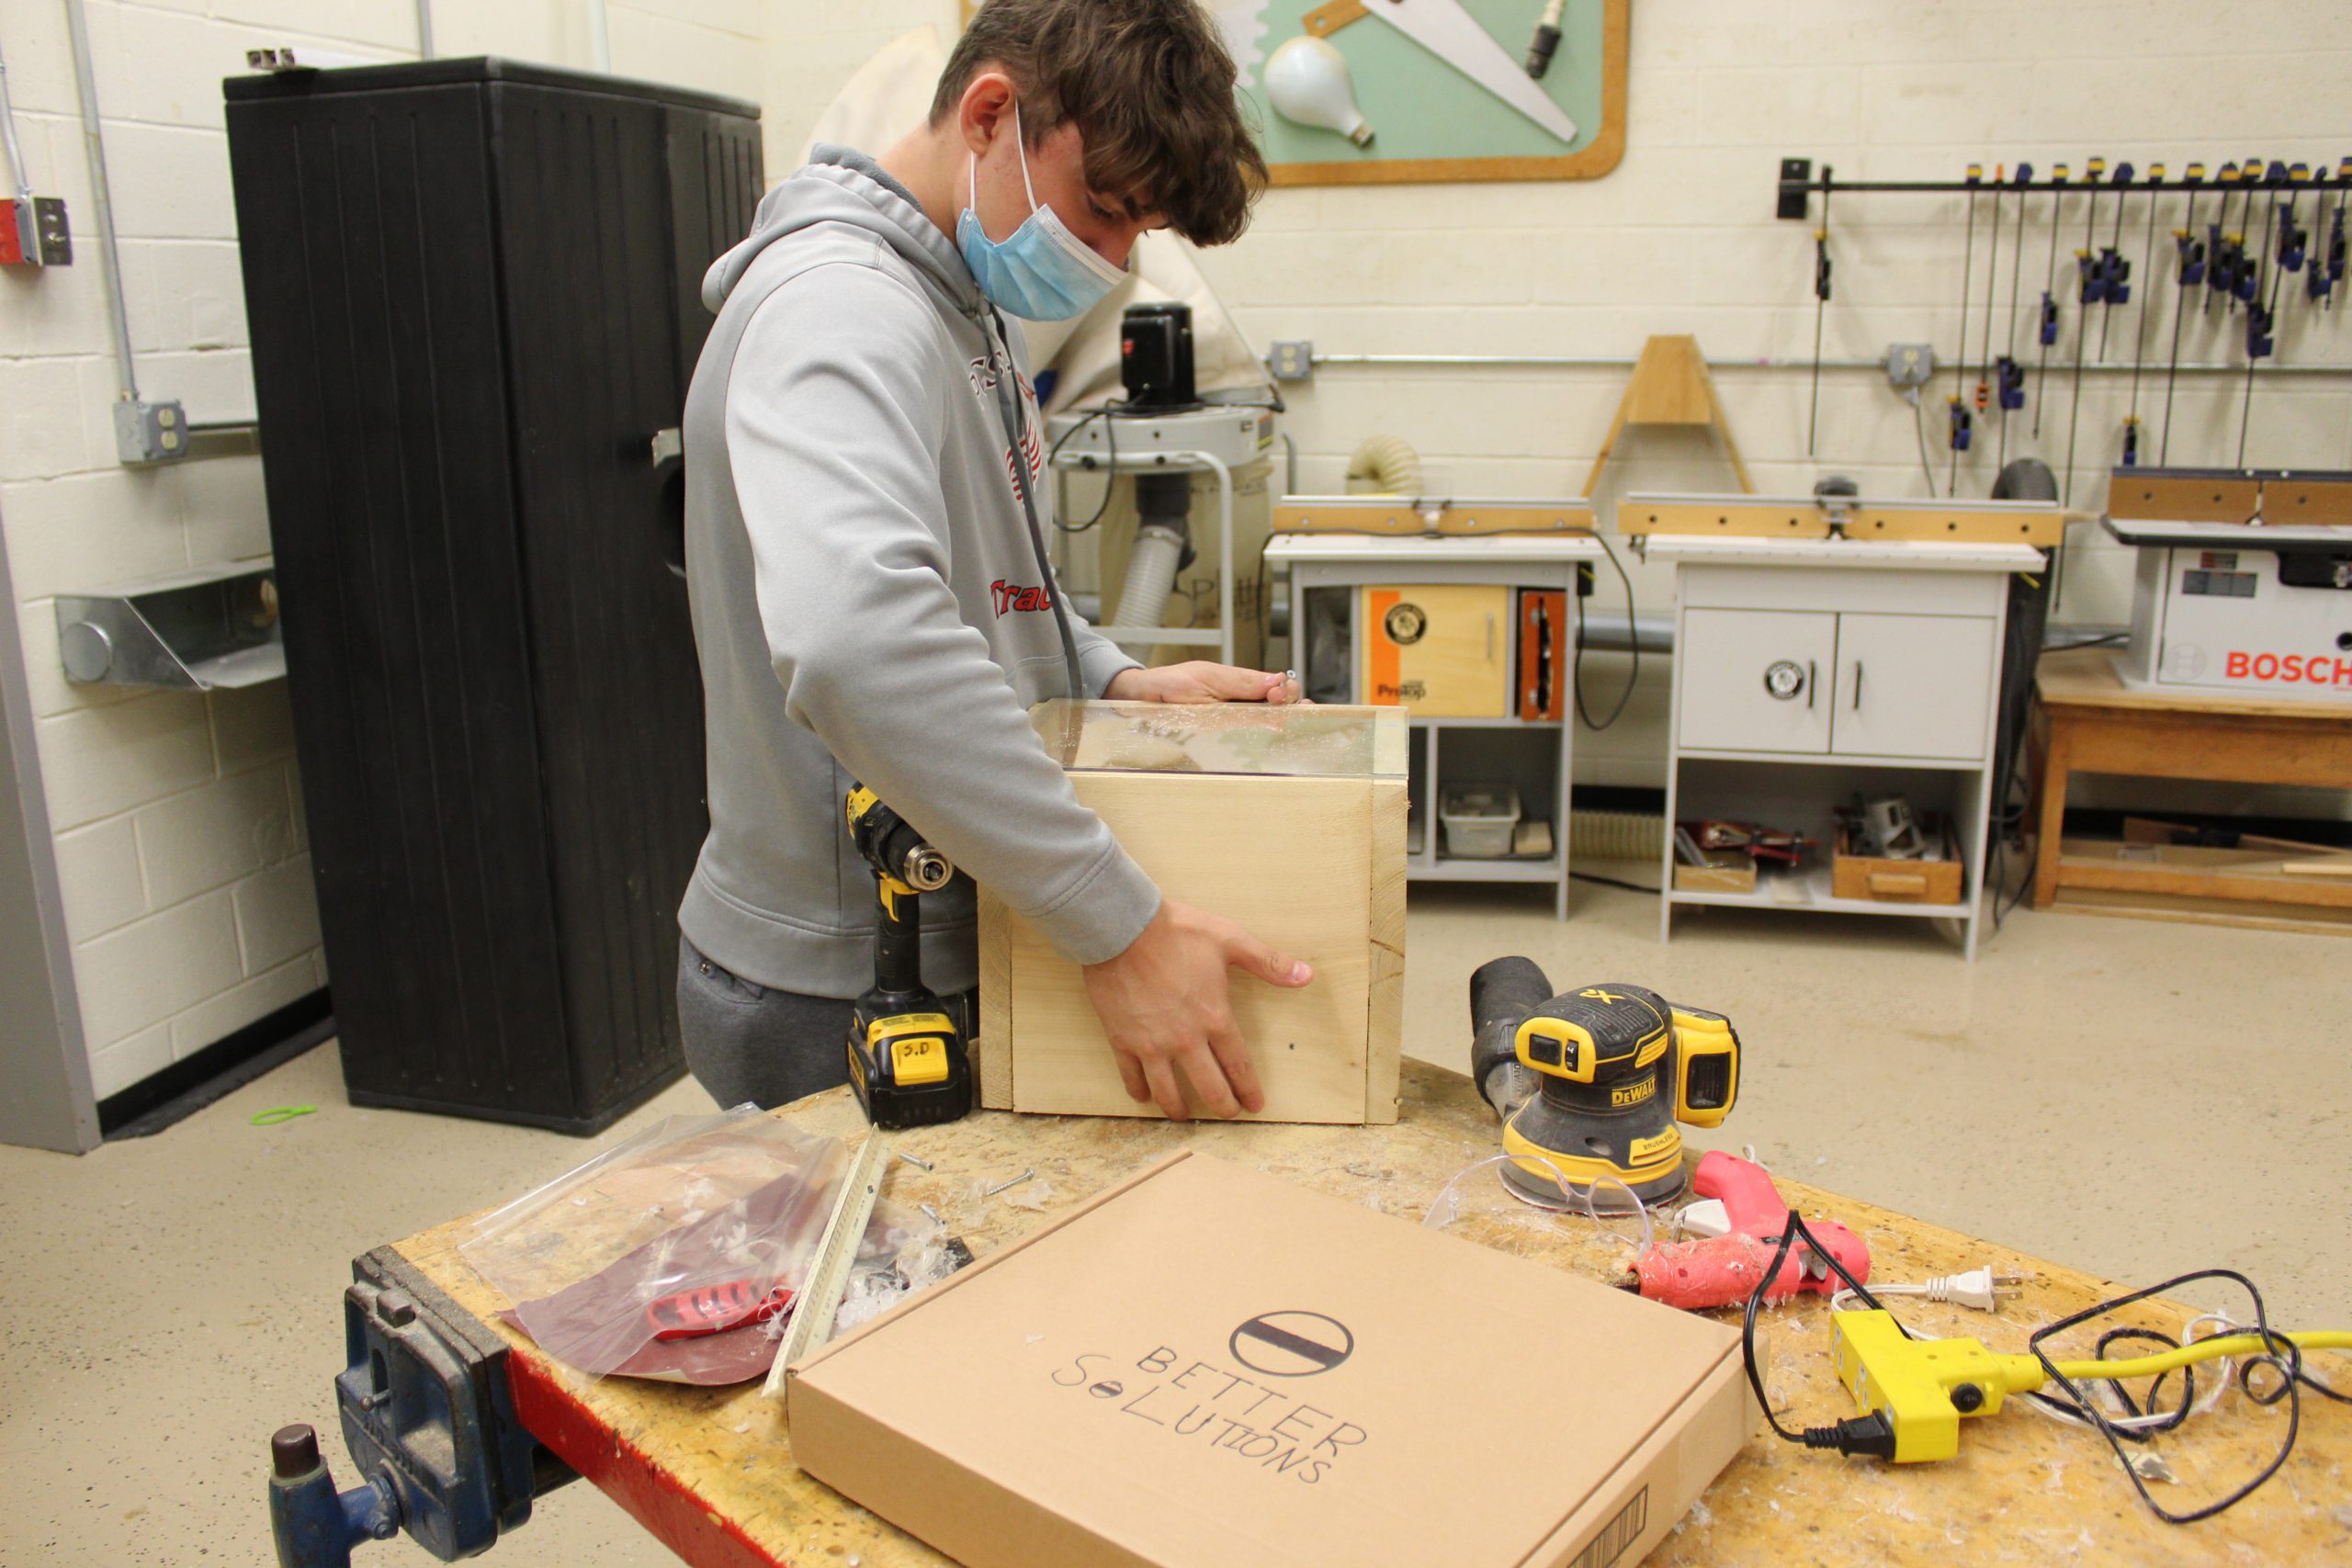 A student in a shop constructs a box with a drill and sander nearby